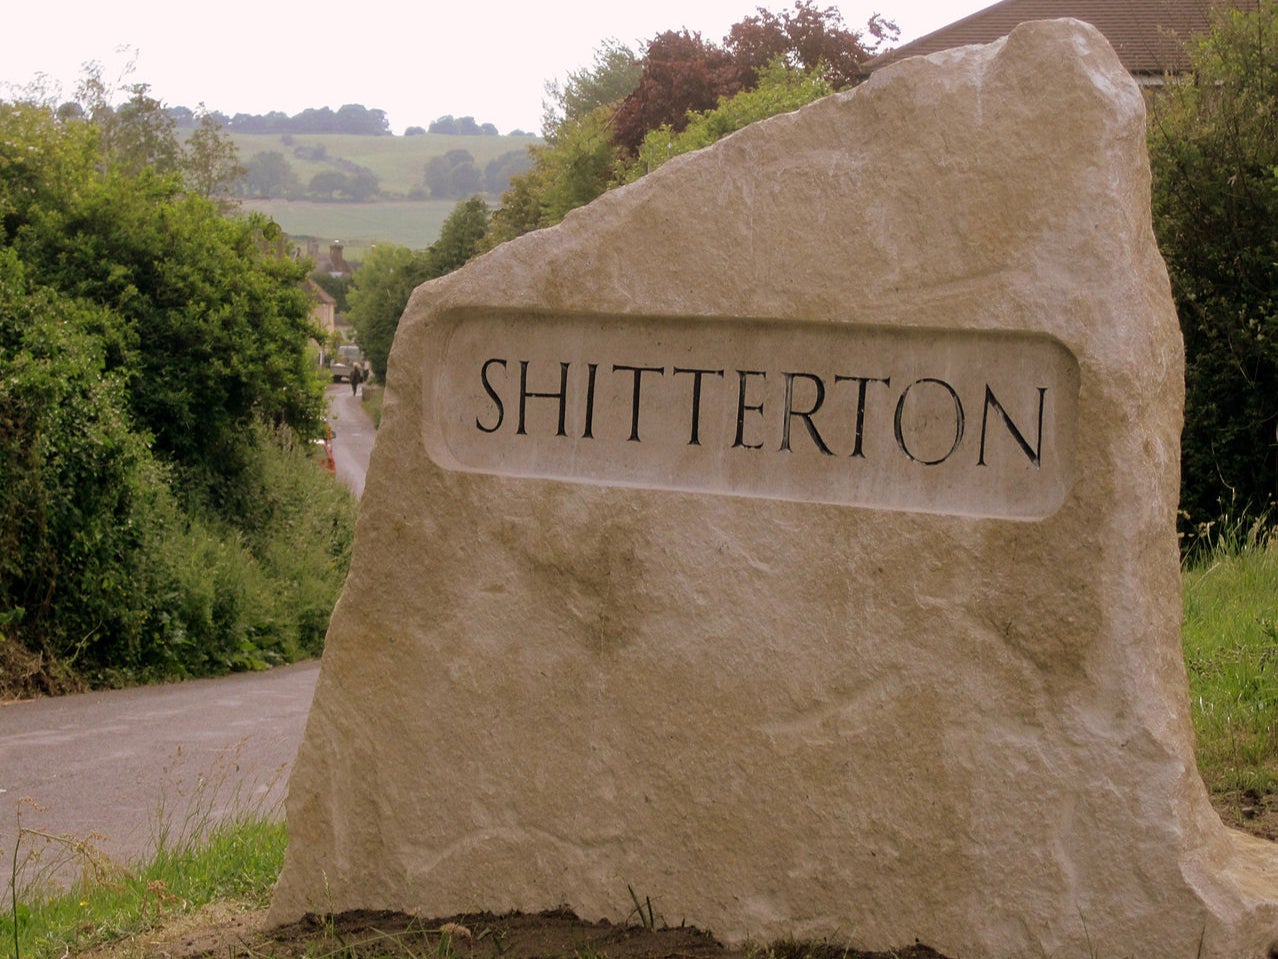 The town of Shitterton in Dorset had its name set in stone to deter people from stealing its road sign